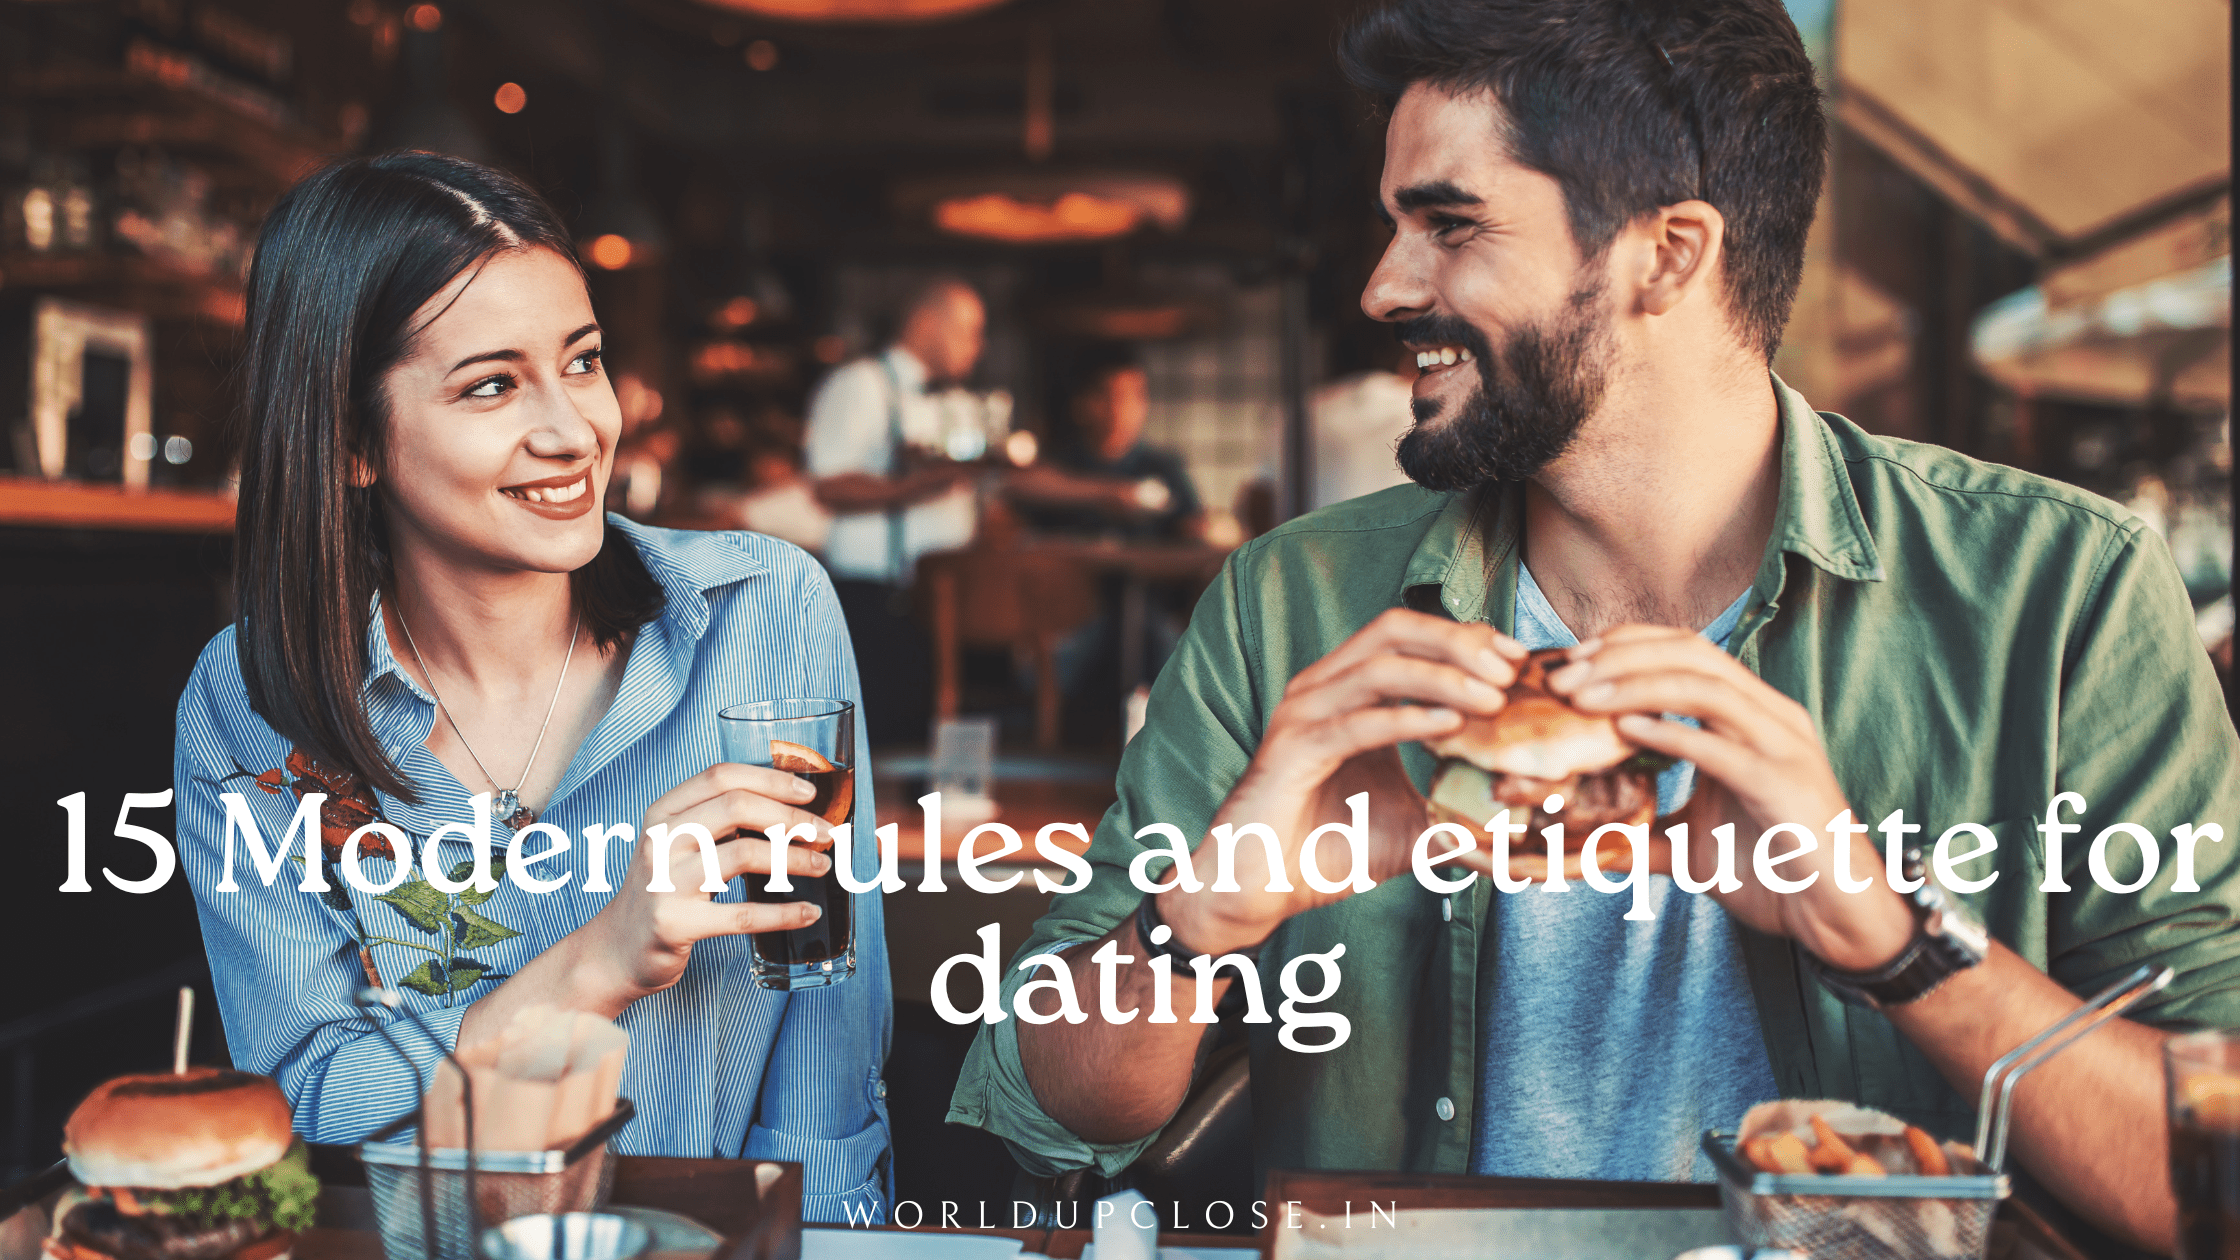 15 Modern rules and etiquette for dating 5